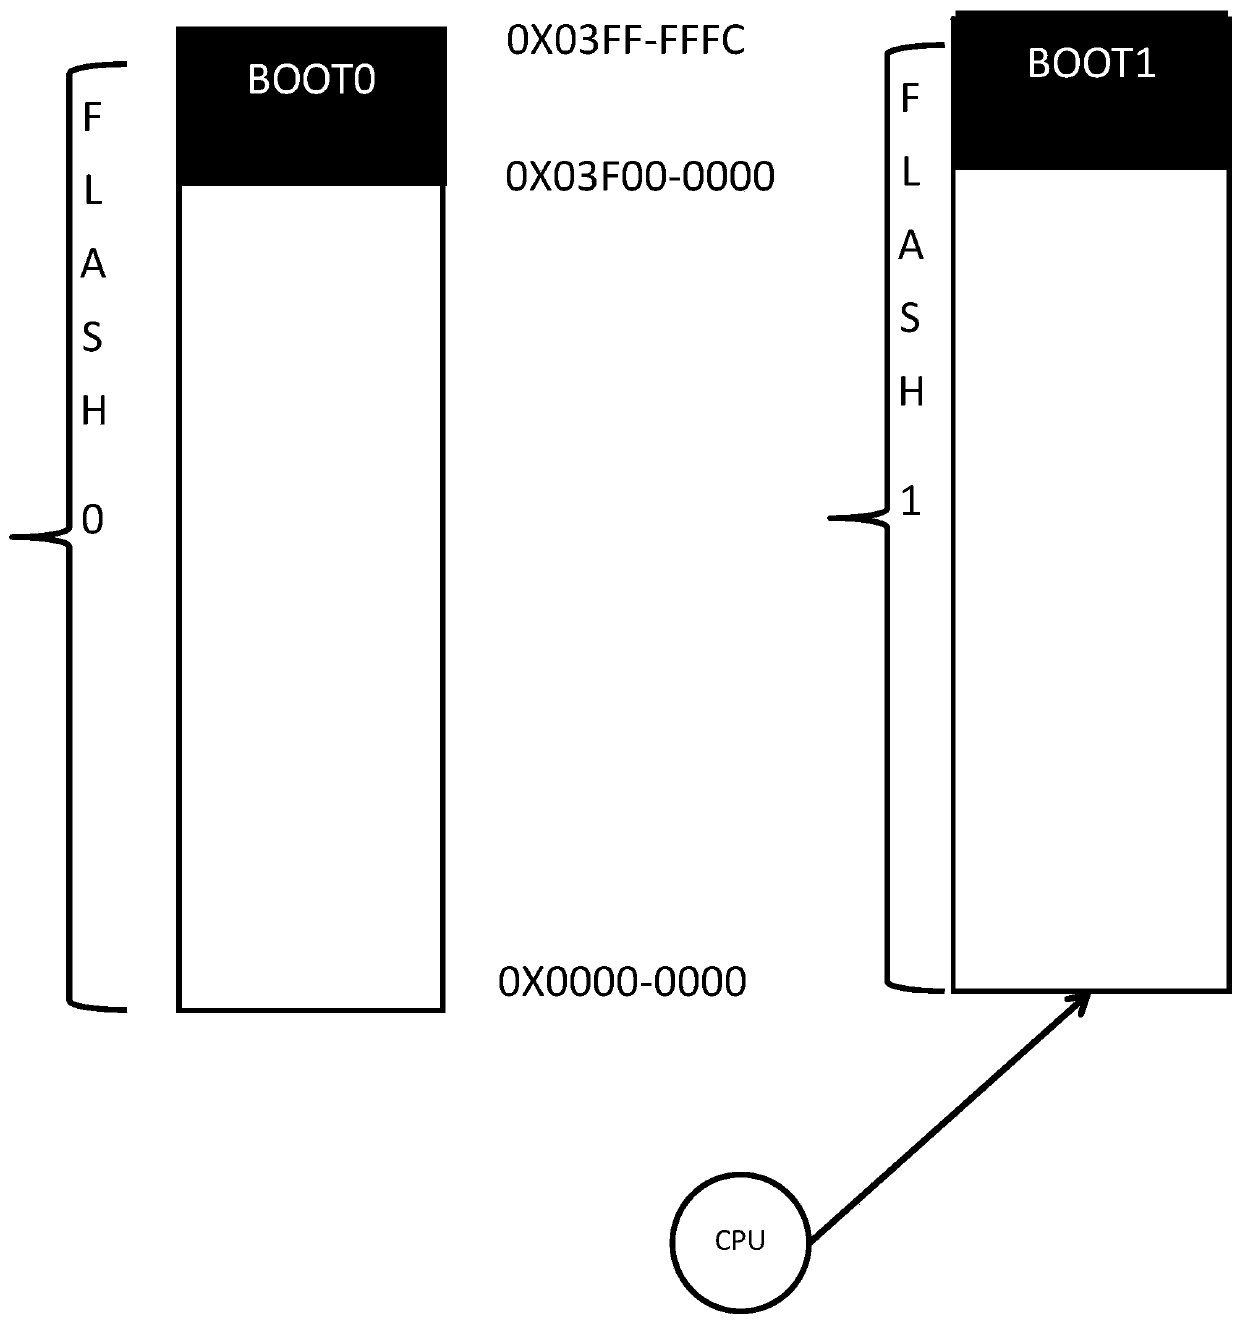 FLASH chip with independent BOOT area, system and method